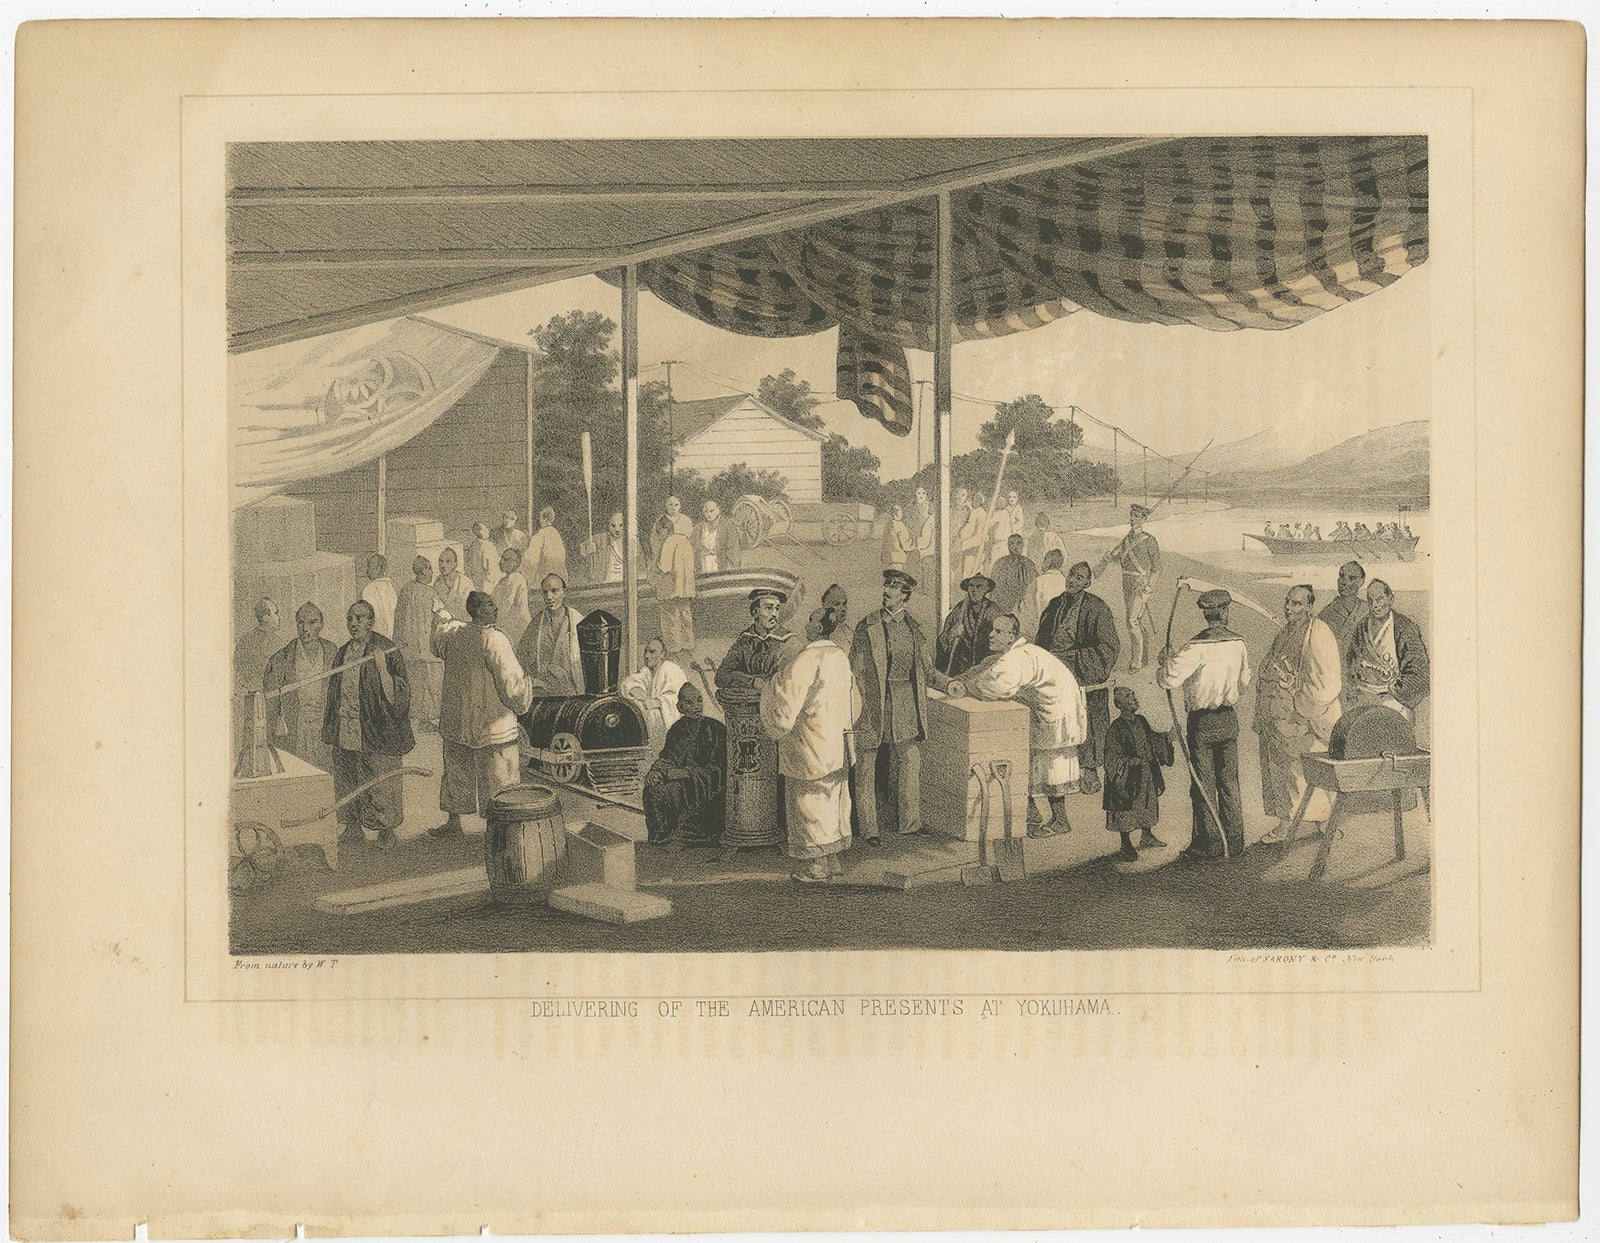 Antique print titled 'Delivering of the American presents at Yokuhama‘. Lithograph of the presentation of American products to the Japanese at Yokohama-shi, Japan. This print originates from 'Narrative of the expedition of an American squadron to